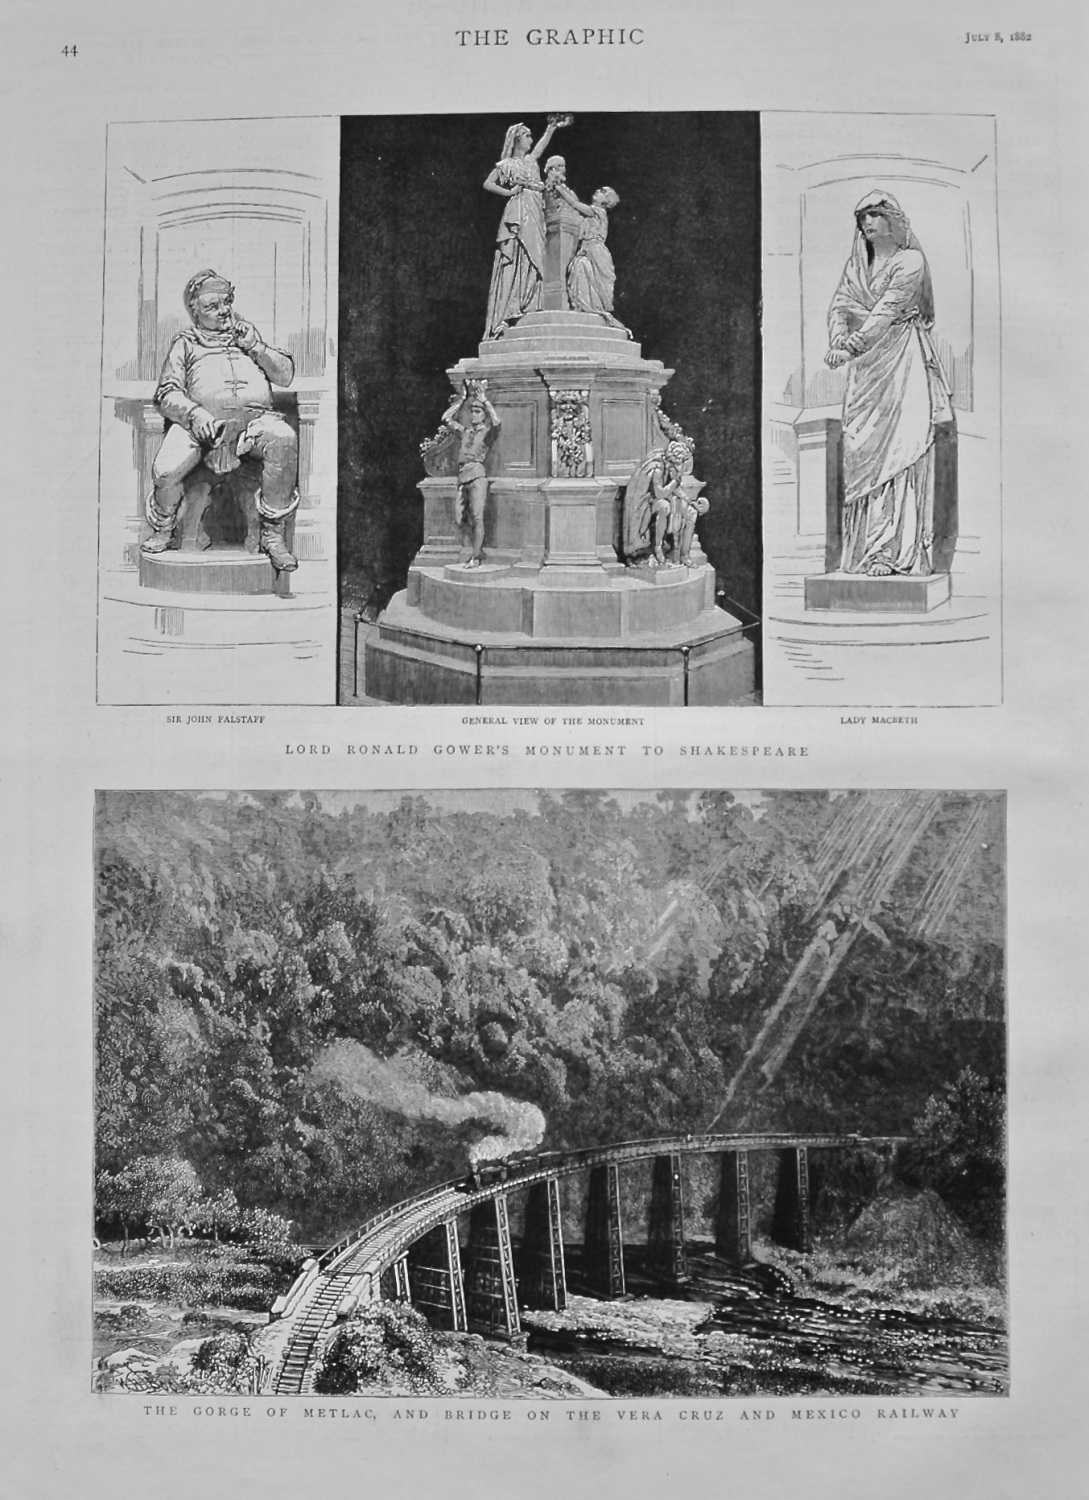 Lord Ronald Gower's Monument to Shakespeare. 1882.